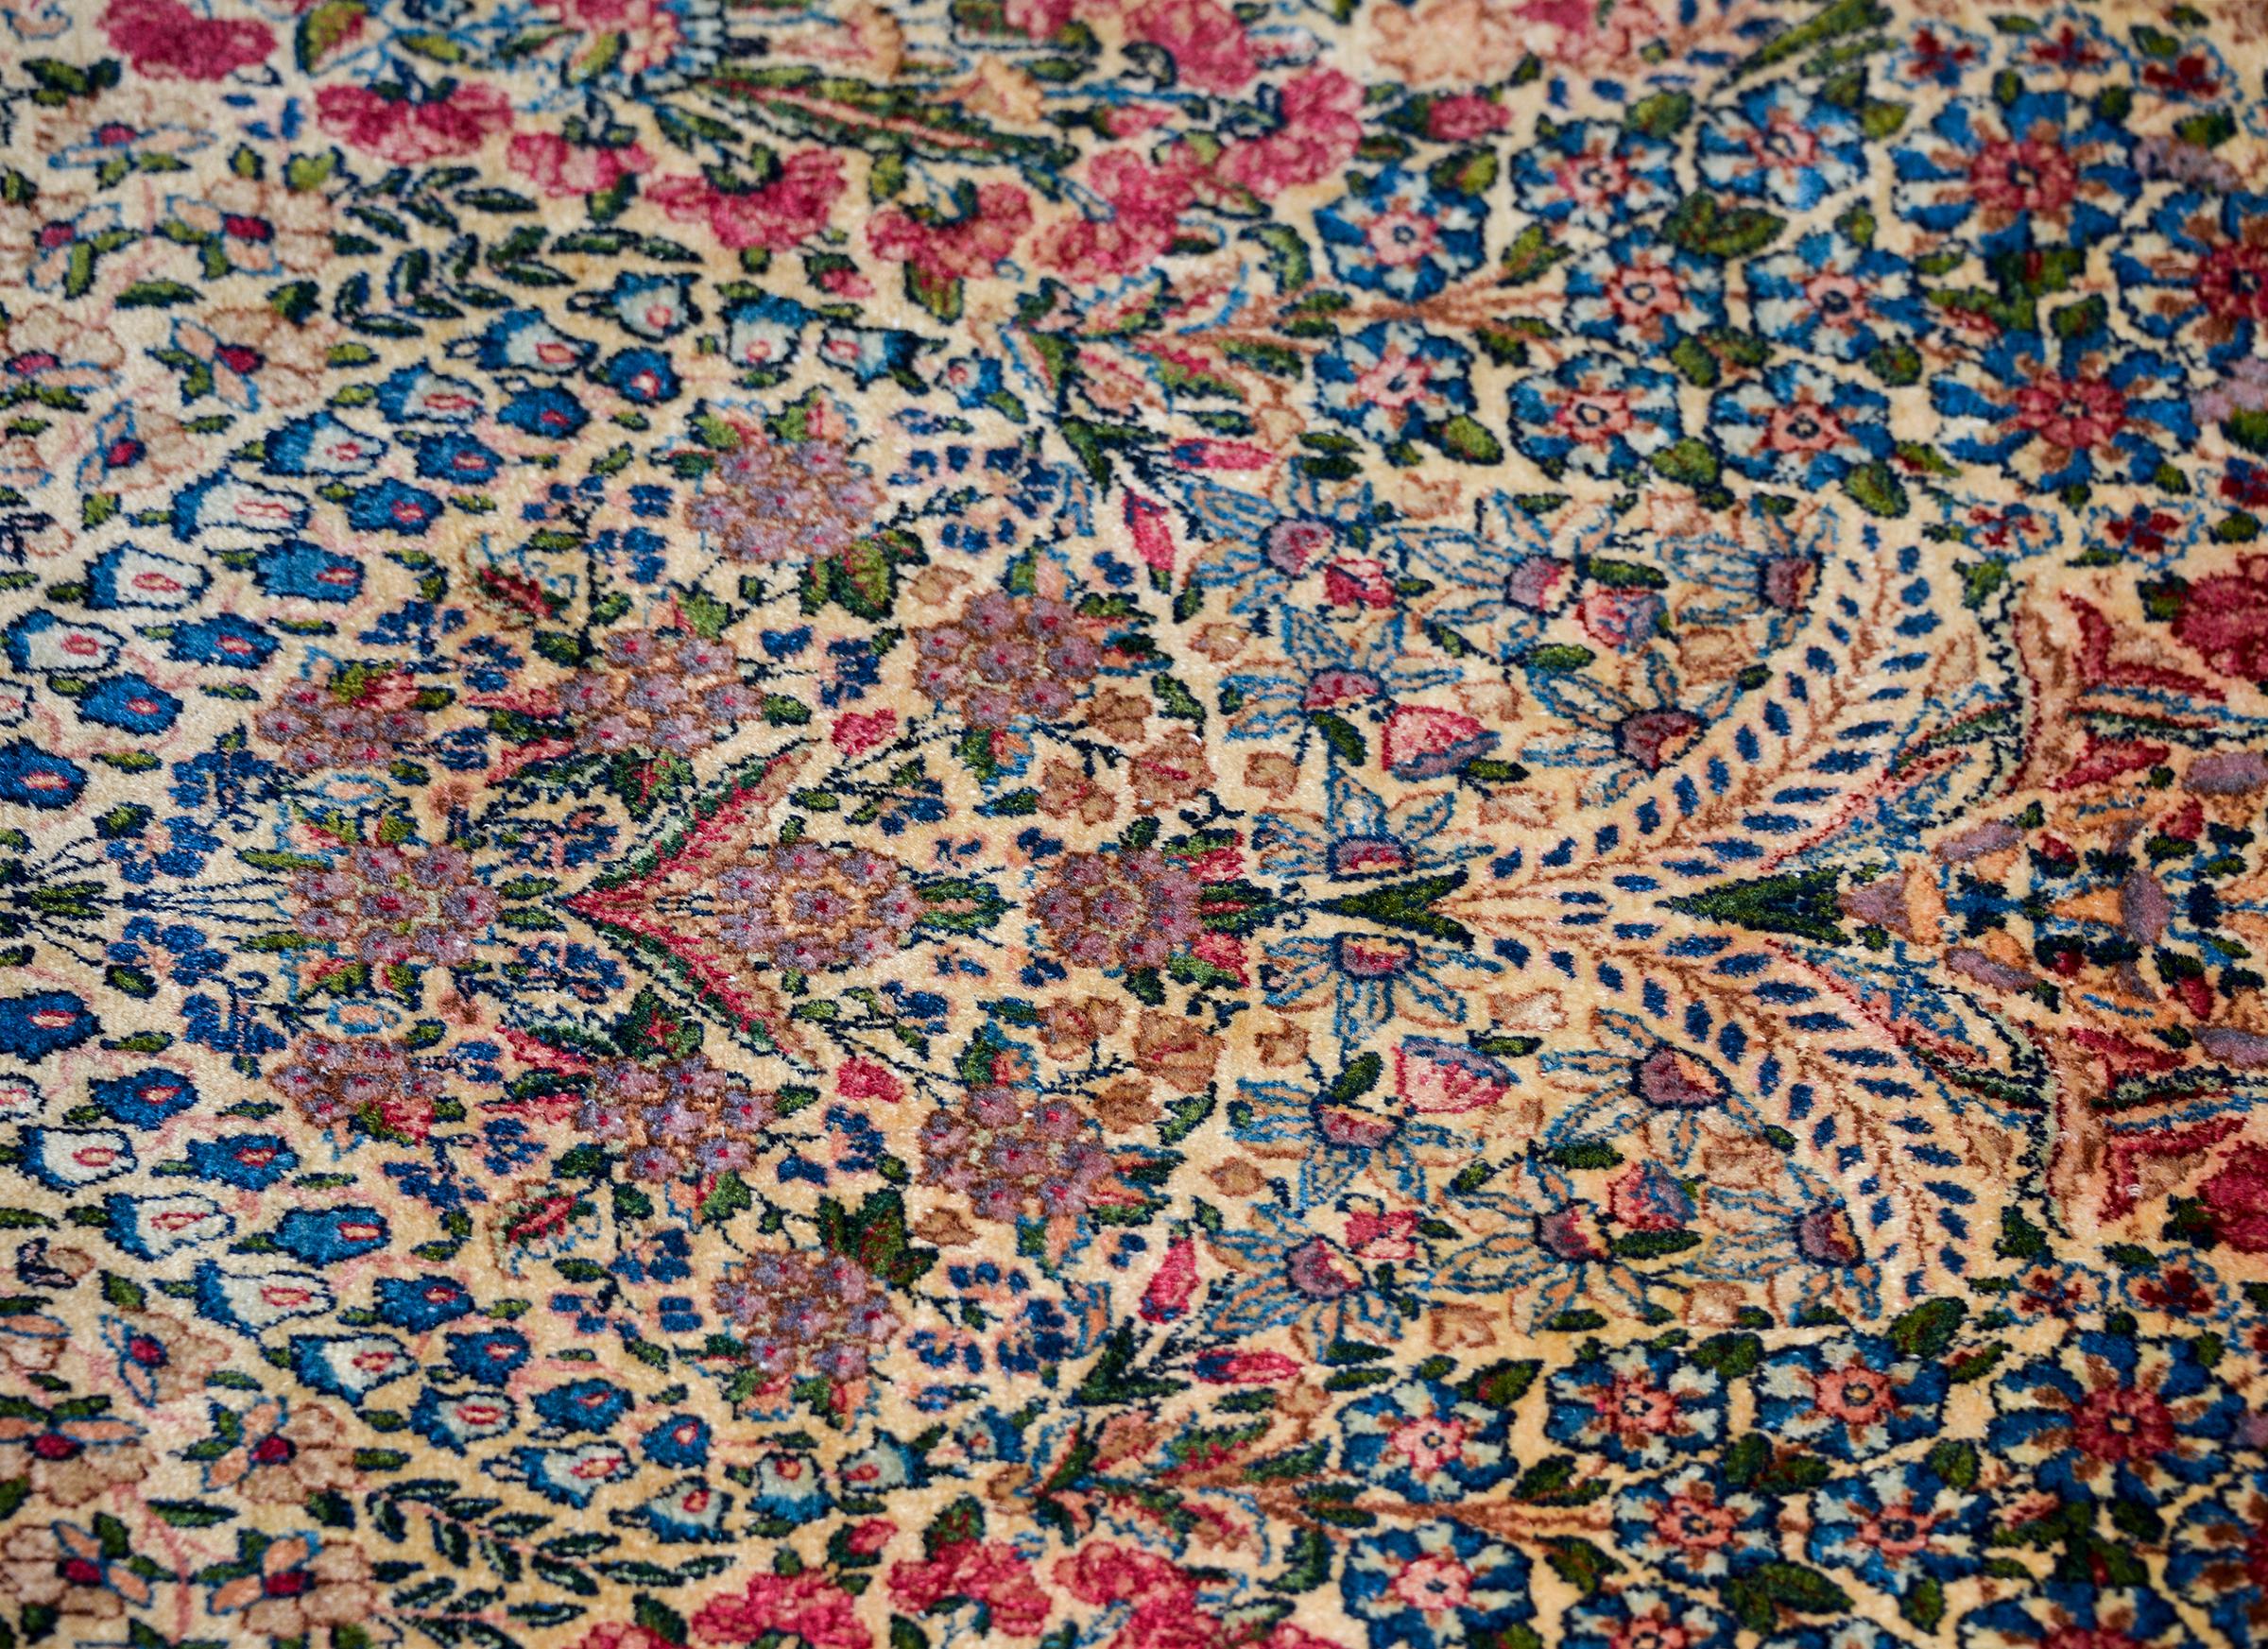 Early 20th Century Persian Lavar Kirman Rug In Good Condition For Sale In Chicago, IL